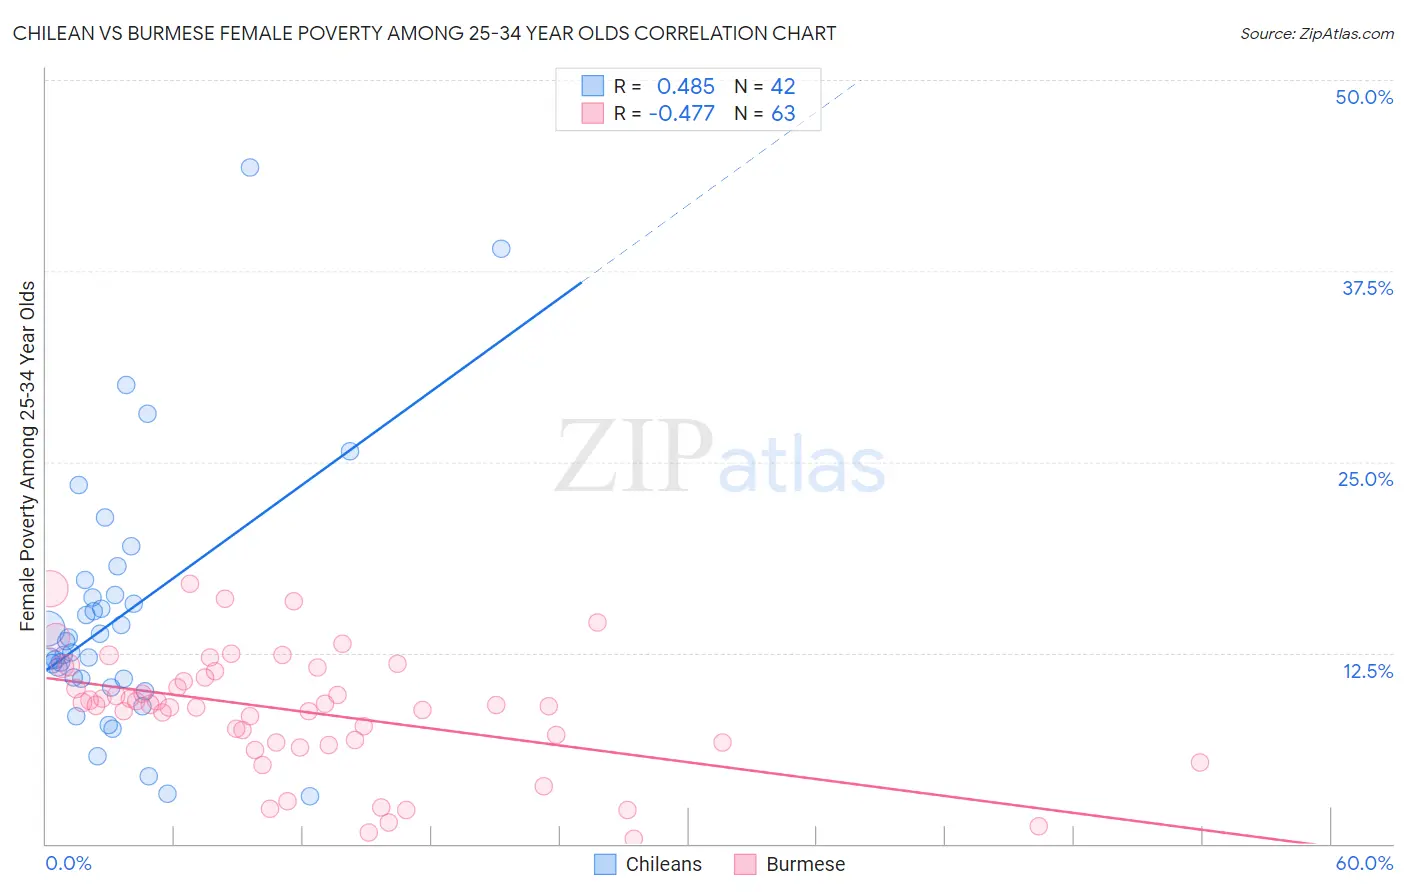 Chilean vs Burmese Female Poverty Among 25-34 Year Olds